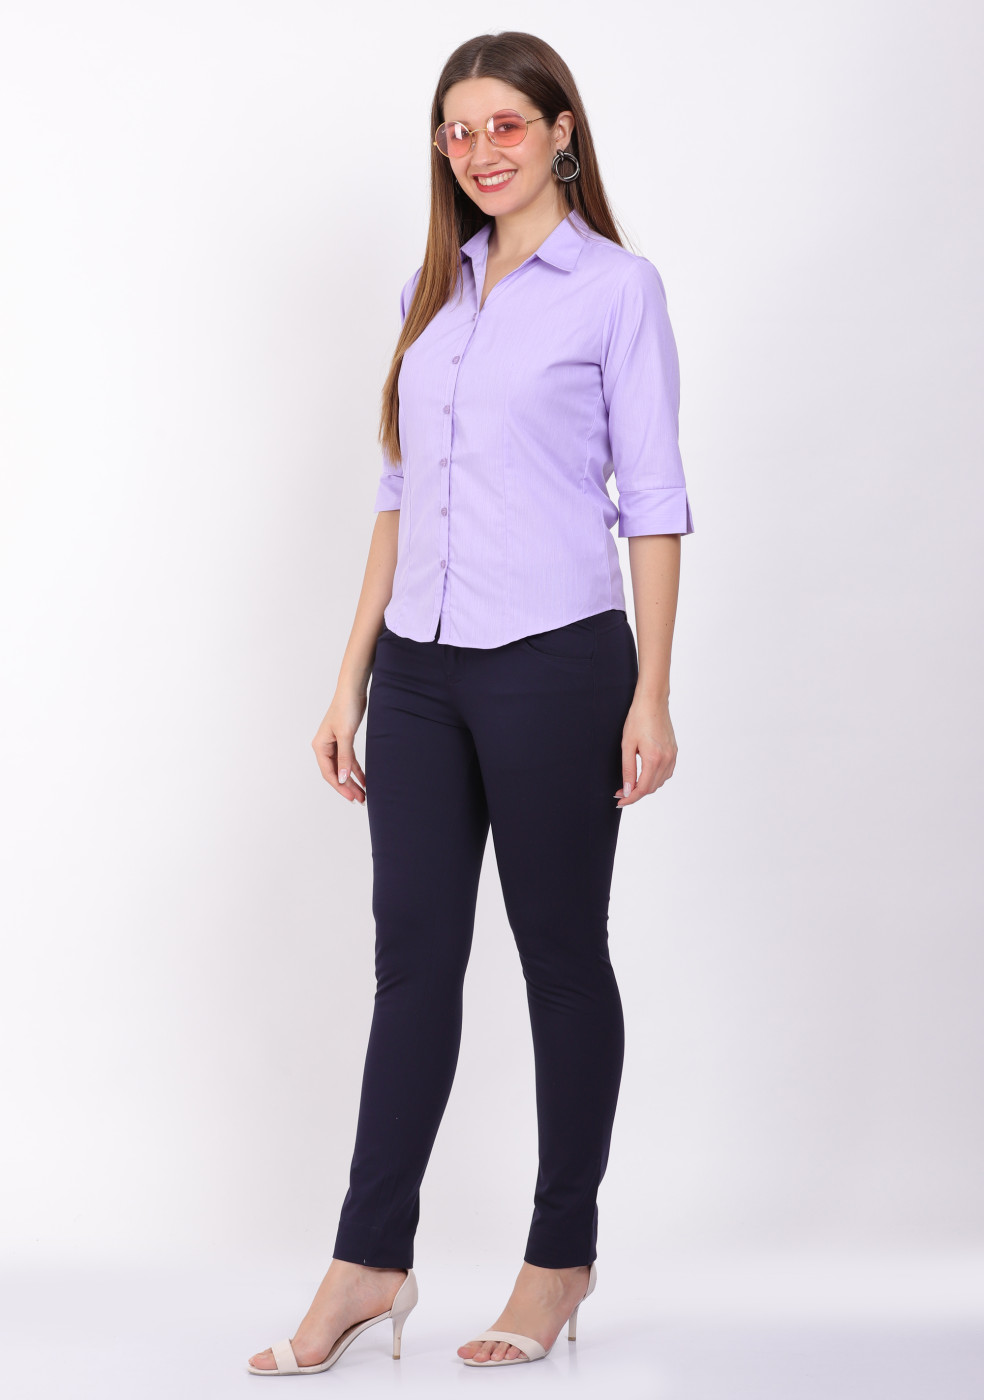 Zx3 Trouser Pant For Woman